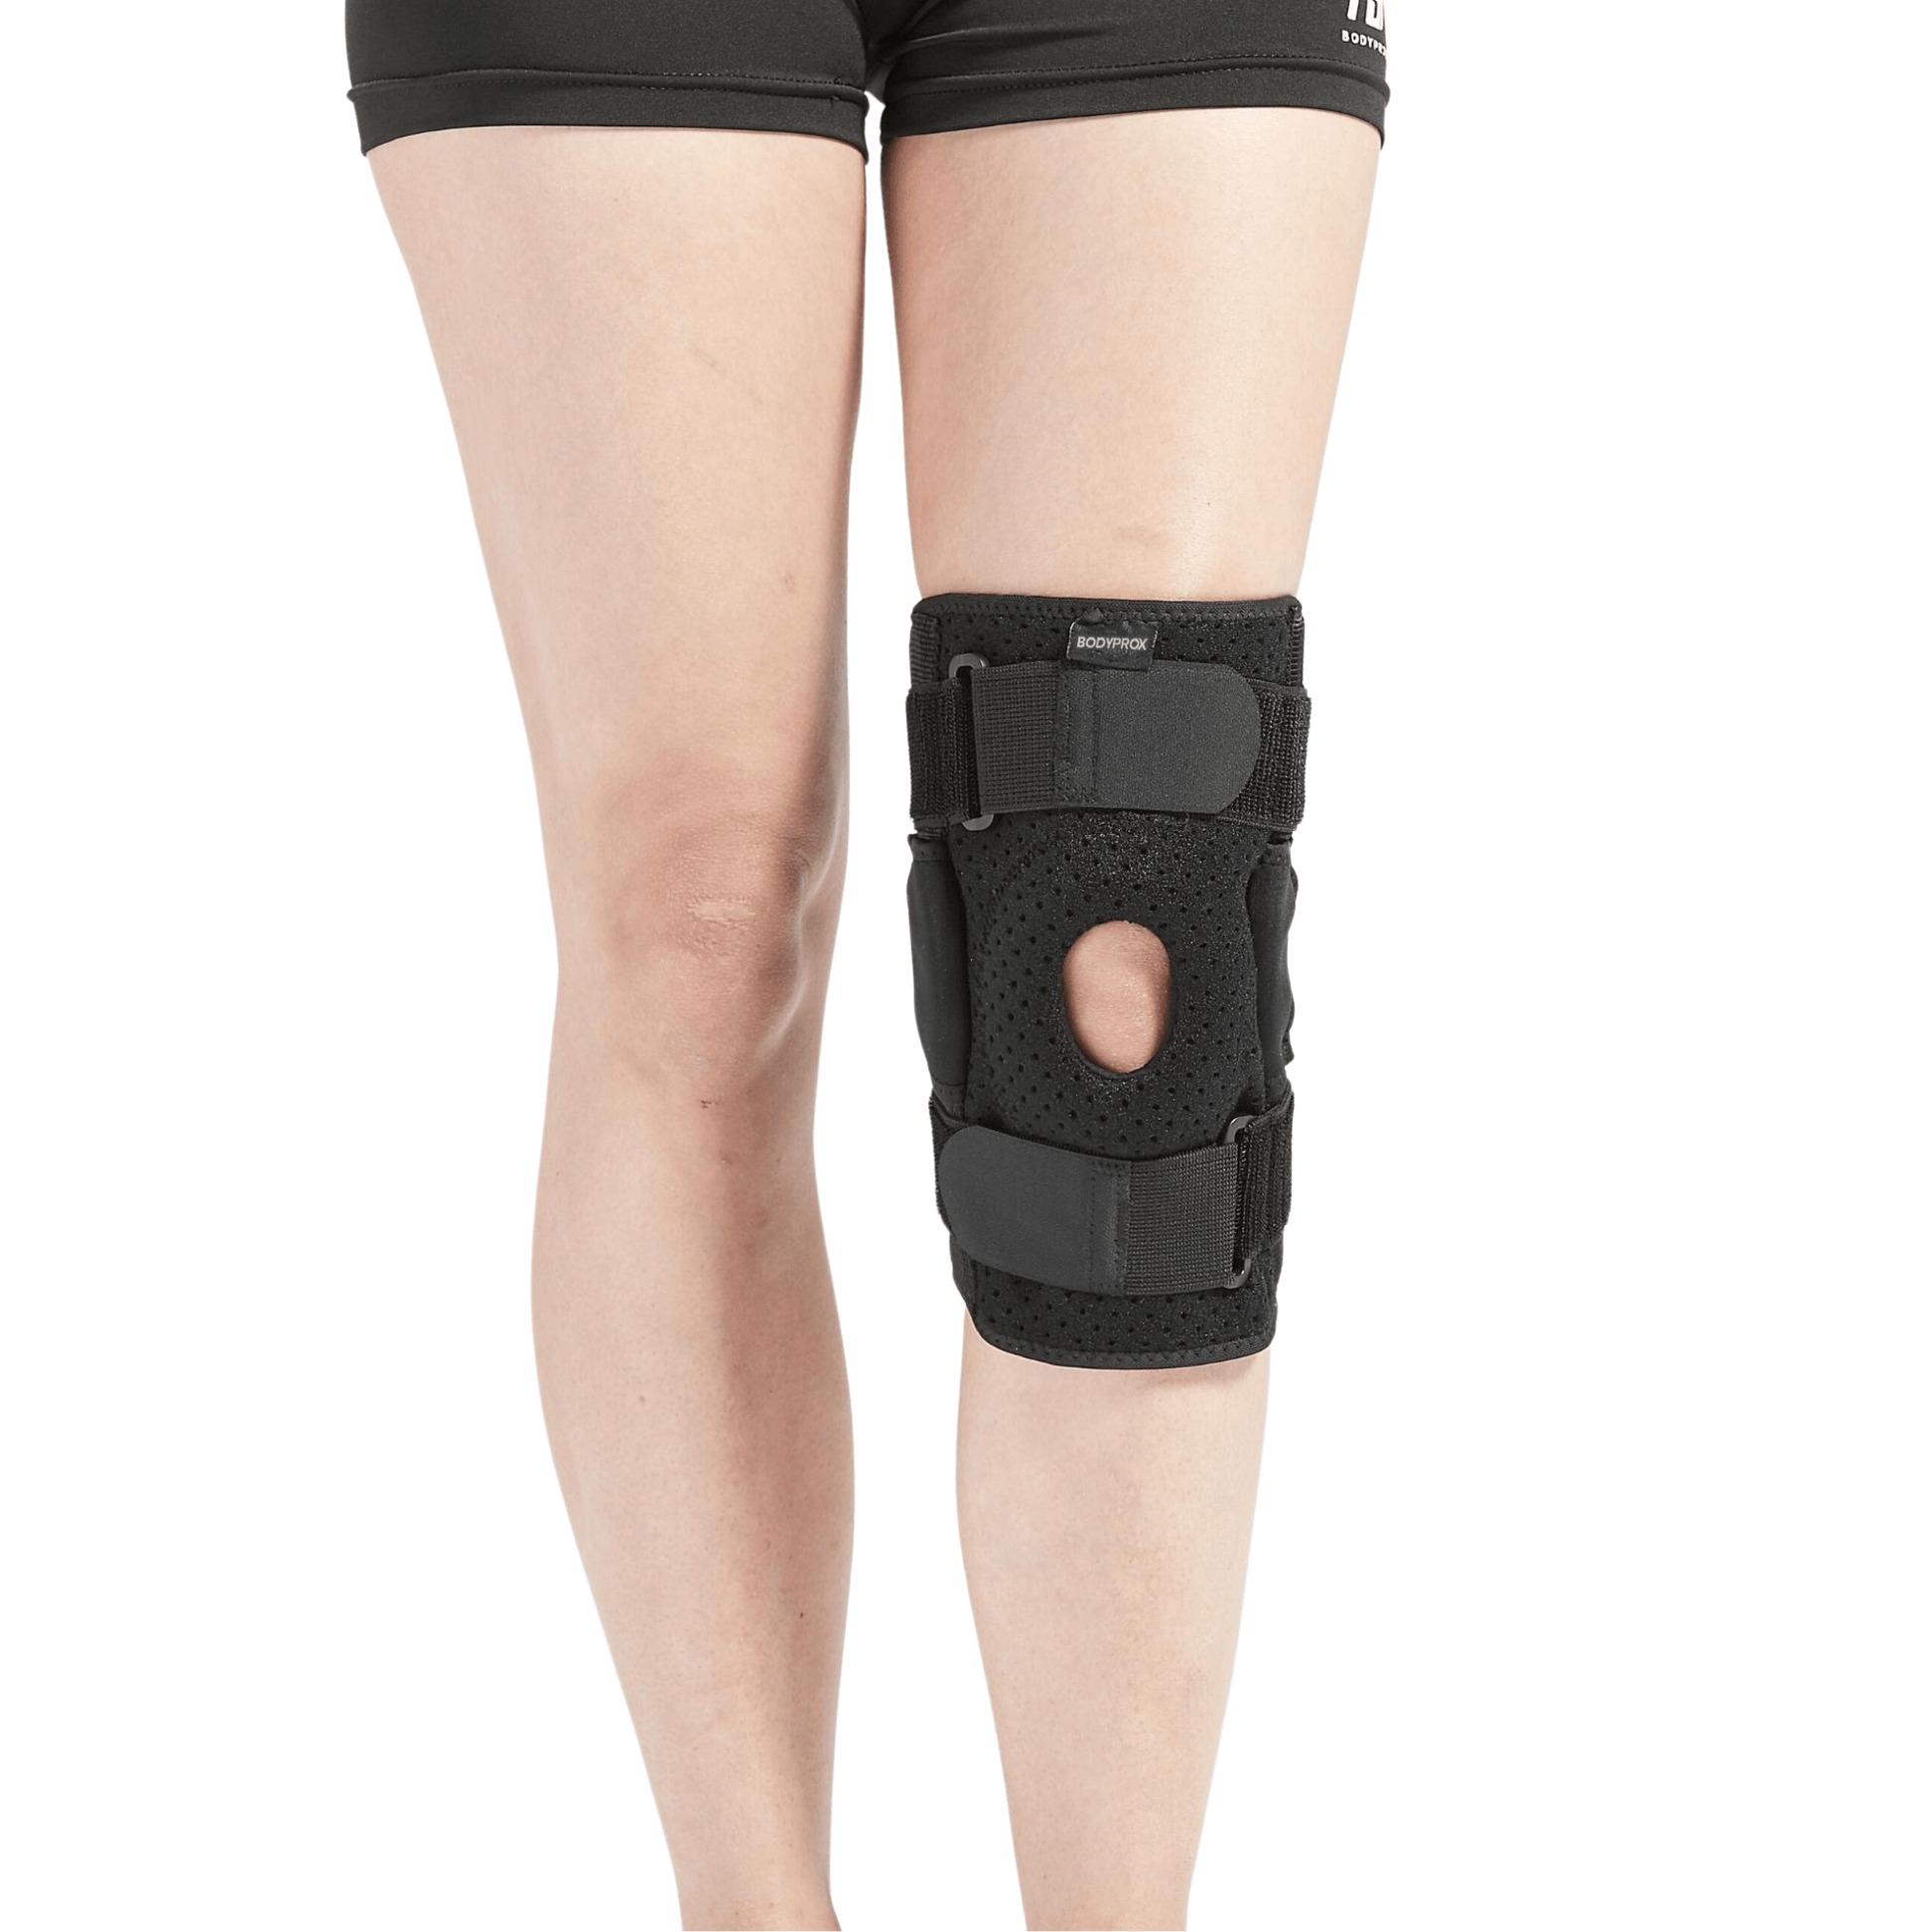 Buy Boots Moderate Everyday Knee Support Medium online